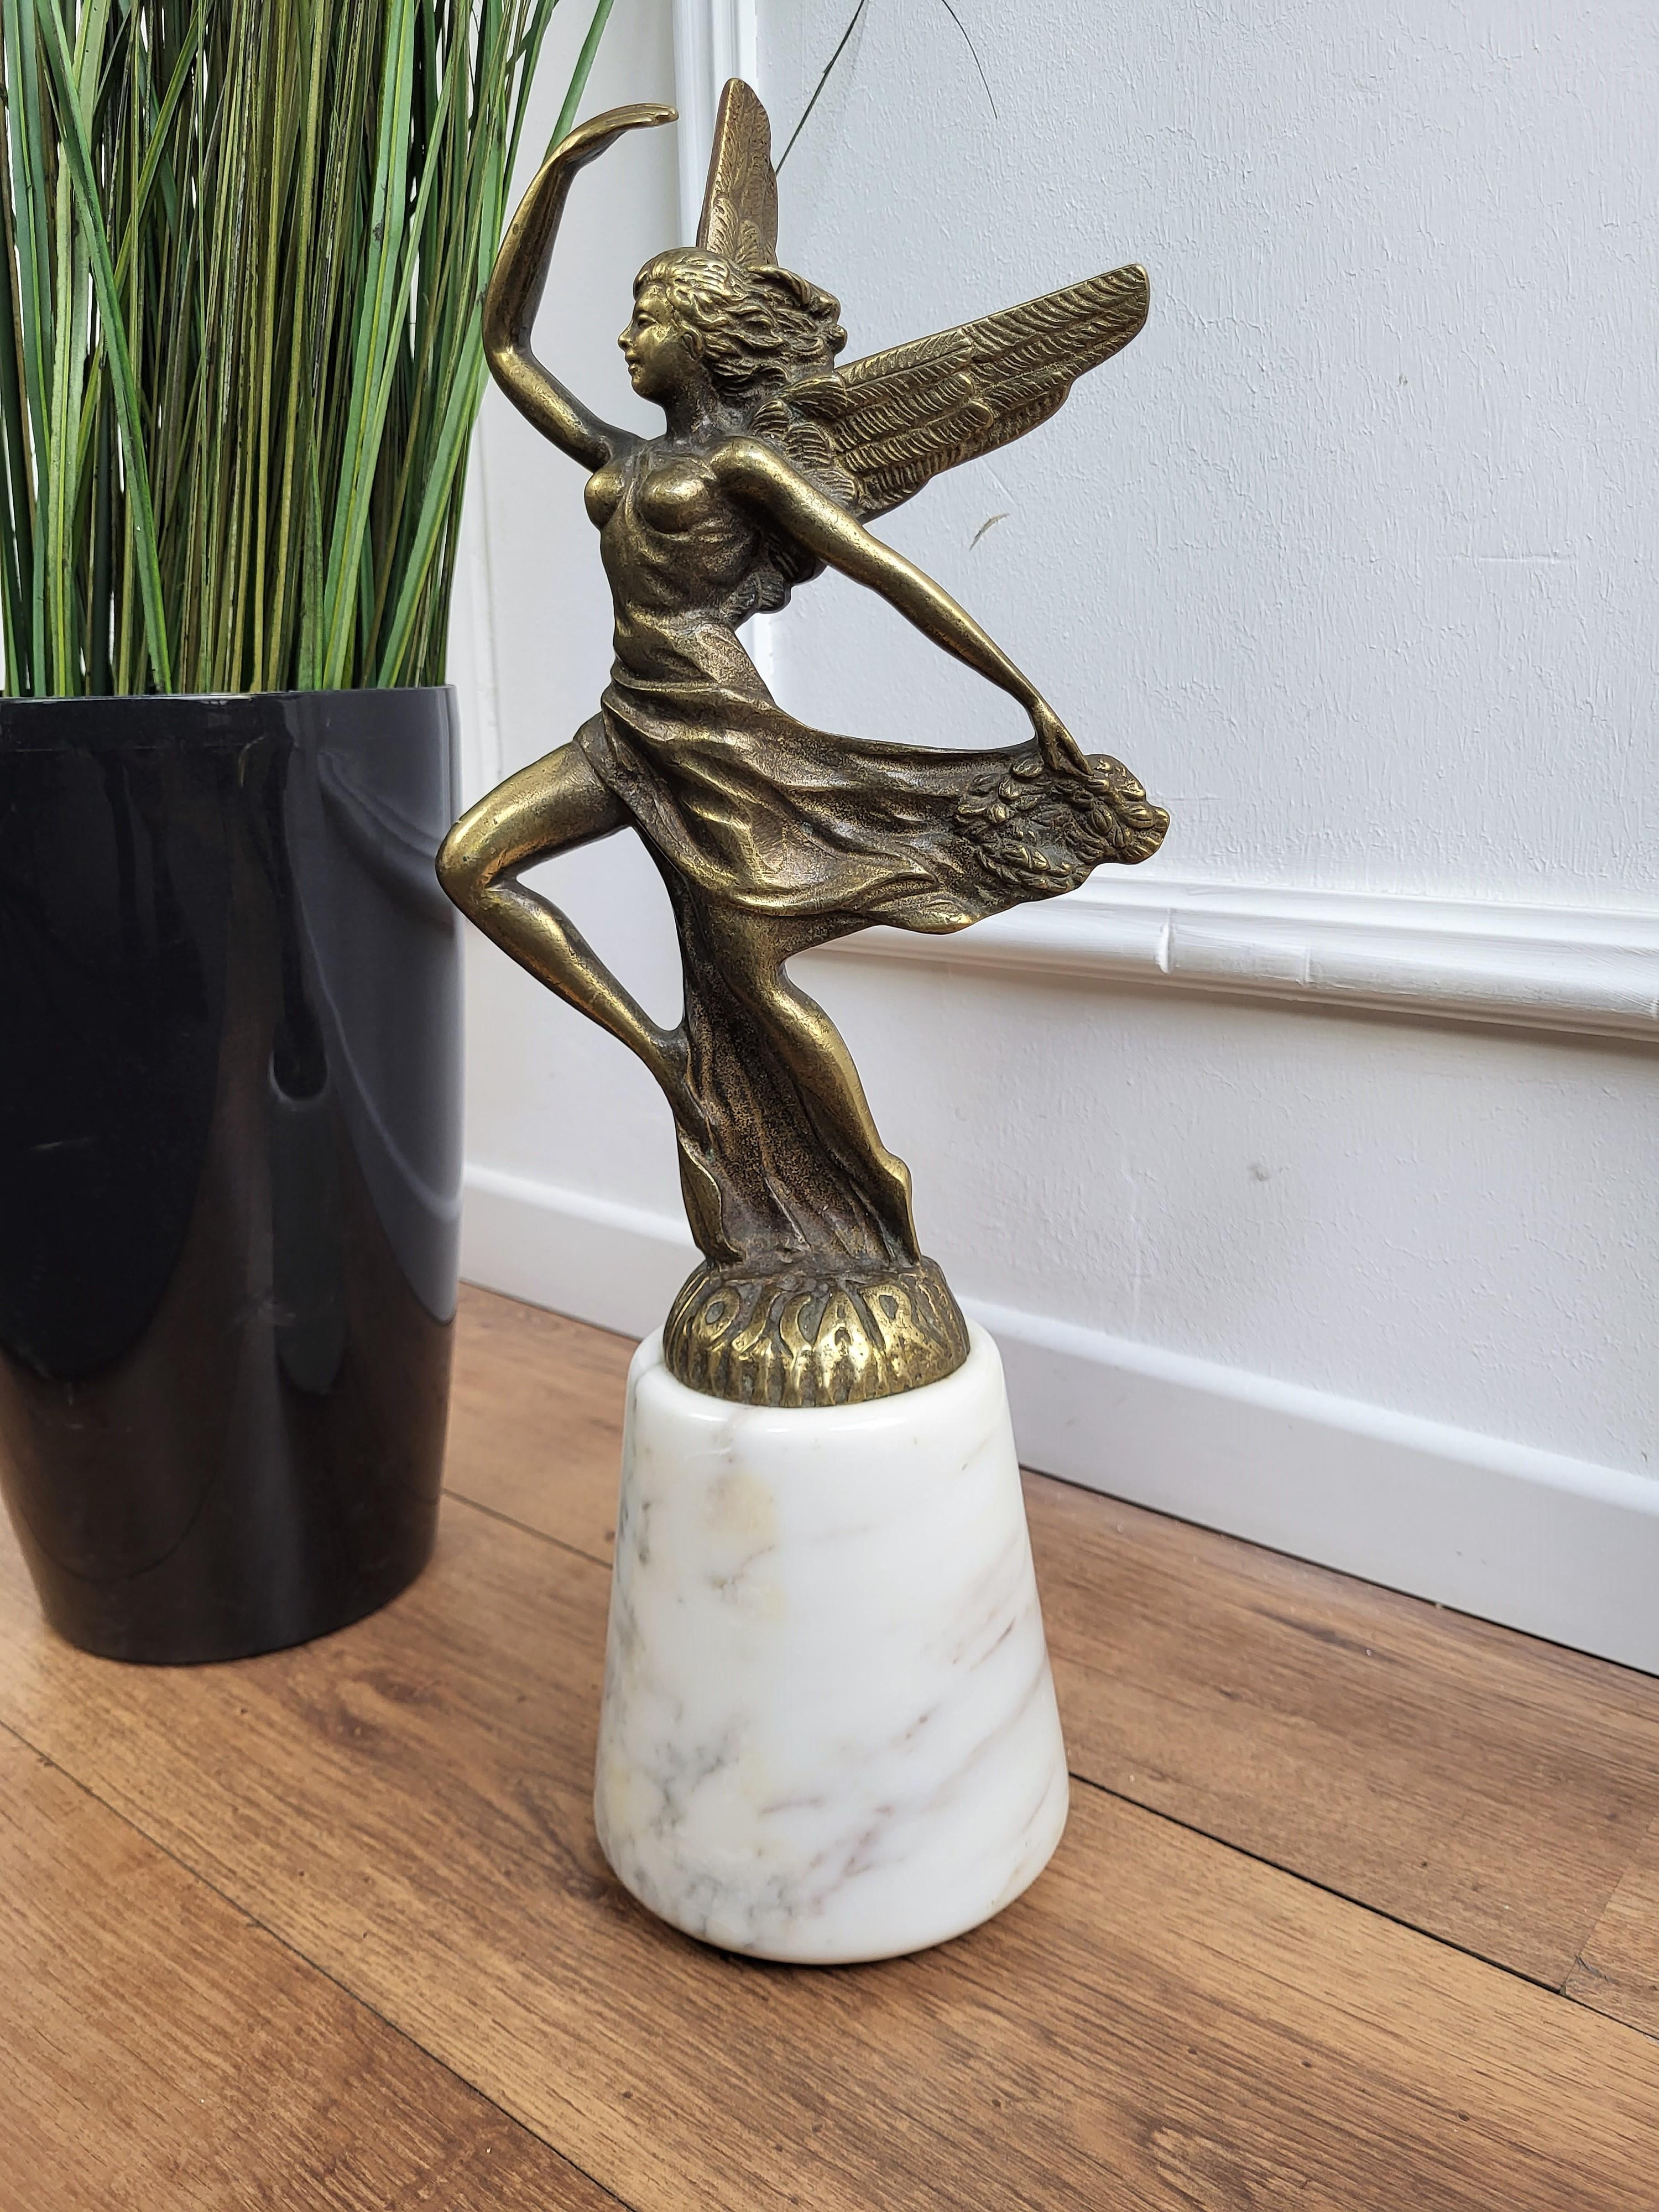 Vintage 1970s Italian stylish brass and marble doorstop, with great design representing a sculpture statue female figure with angel wings, realistically cast and modeled. Originally intended as an academy award, as written the bottom, it is ideal to